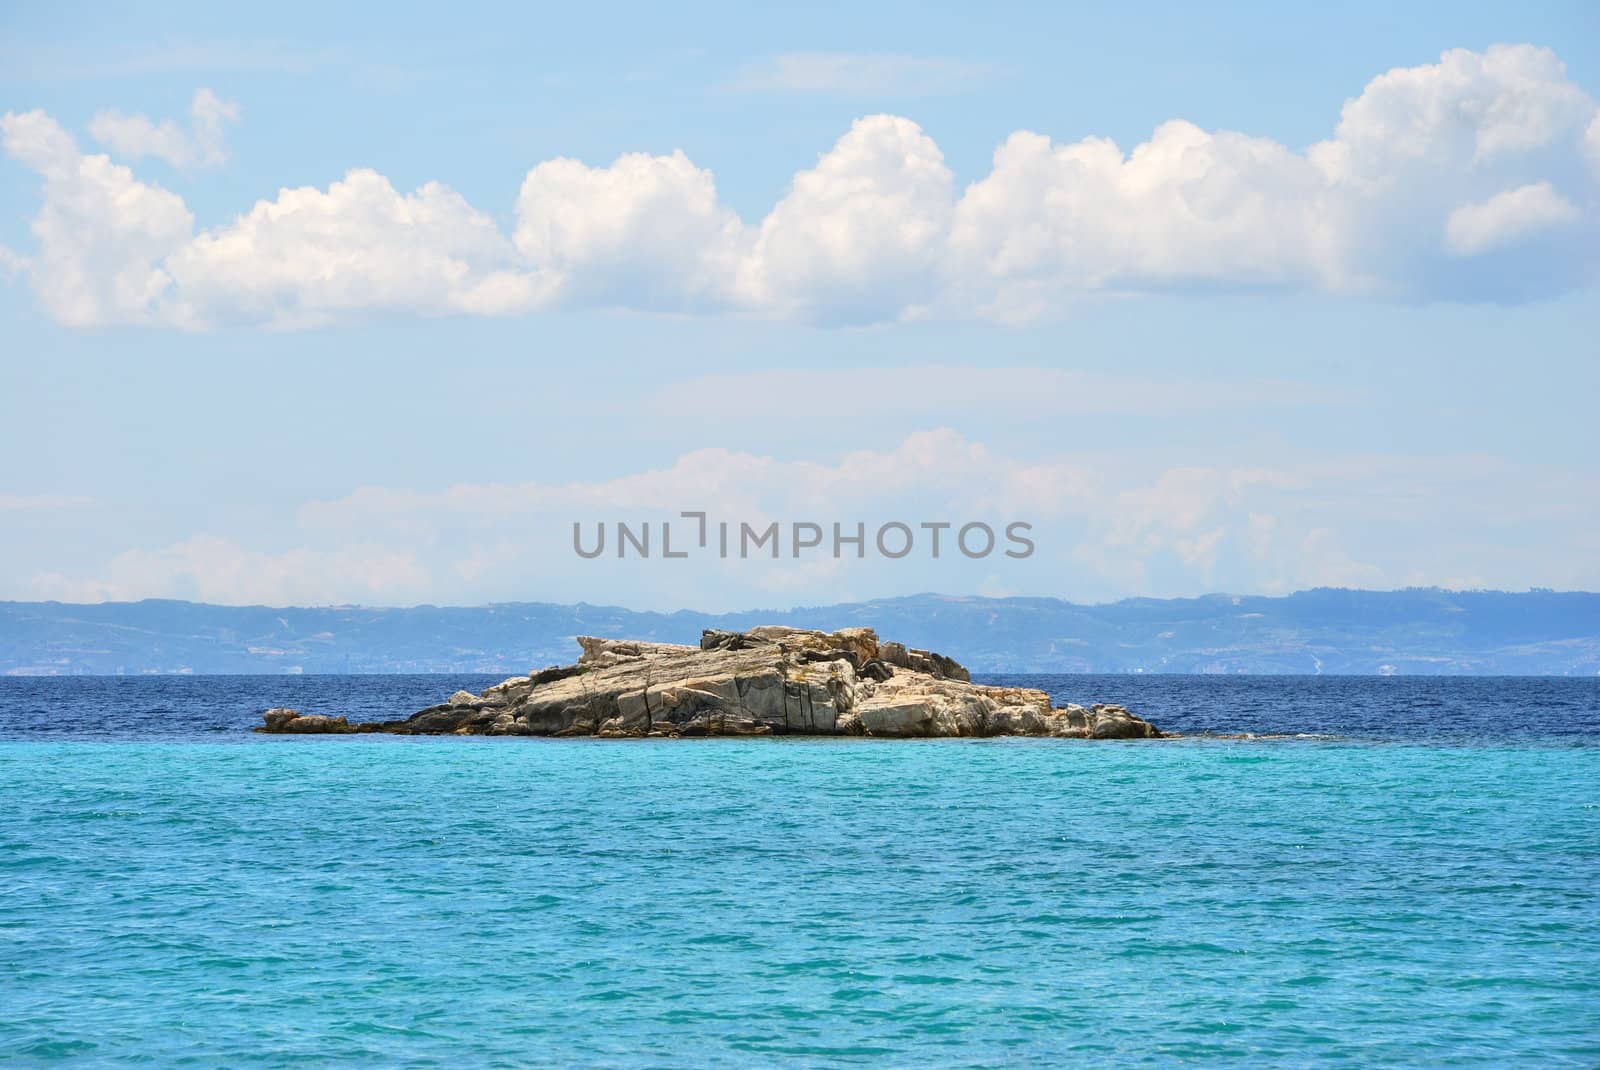 Small rocky island near Kalogria beach in Sithonia, Chalkidiki, Greece, with a view on Kassandra peninsula.